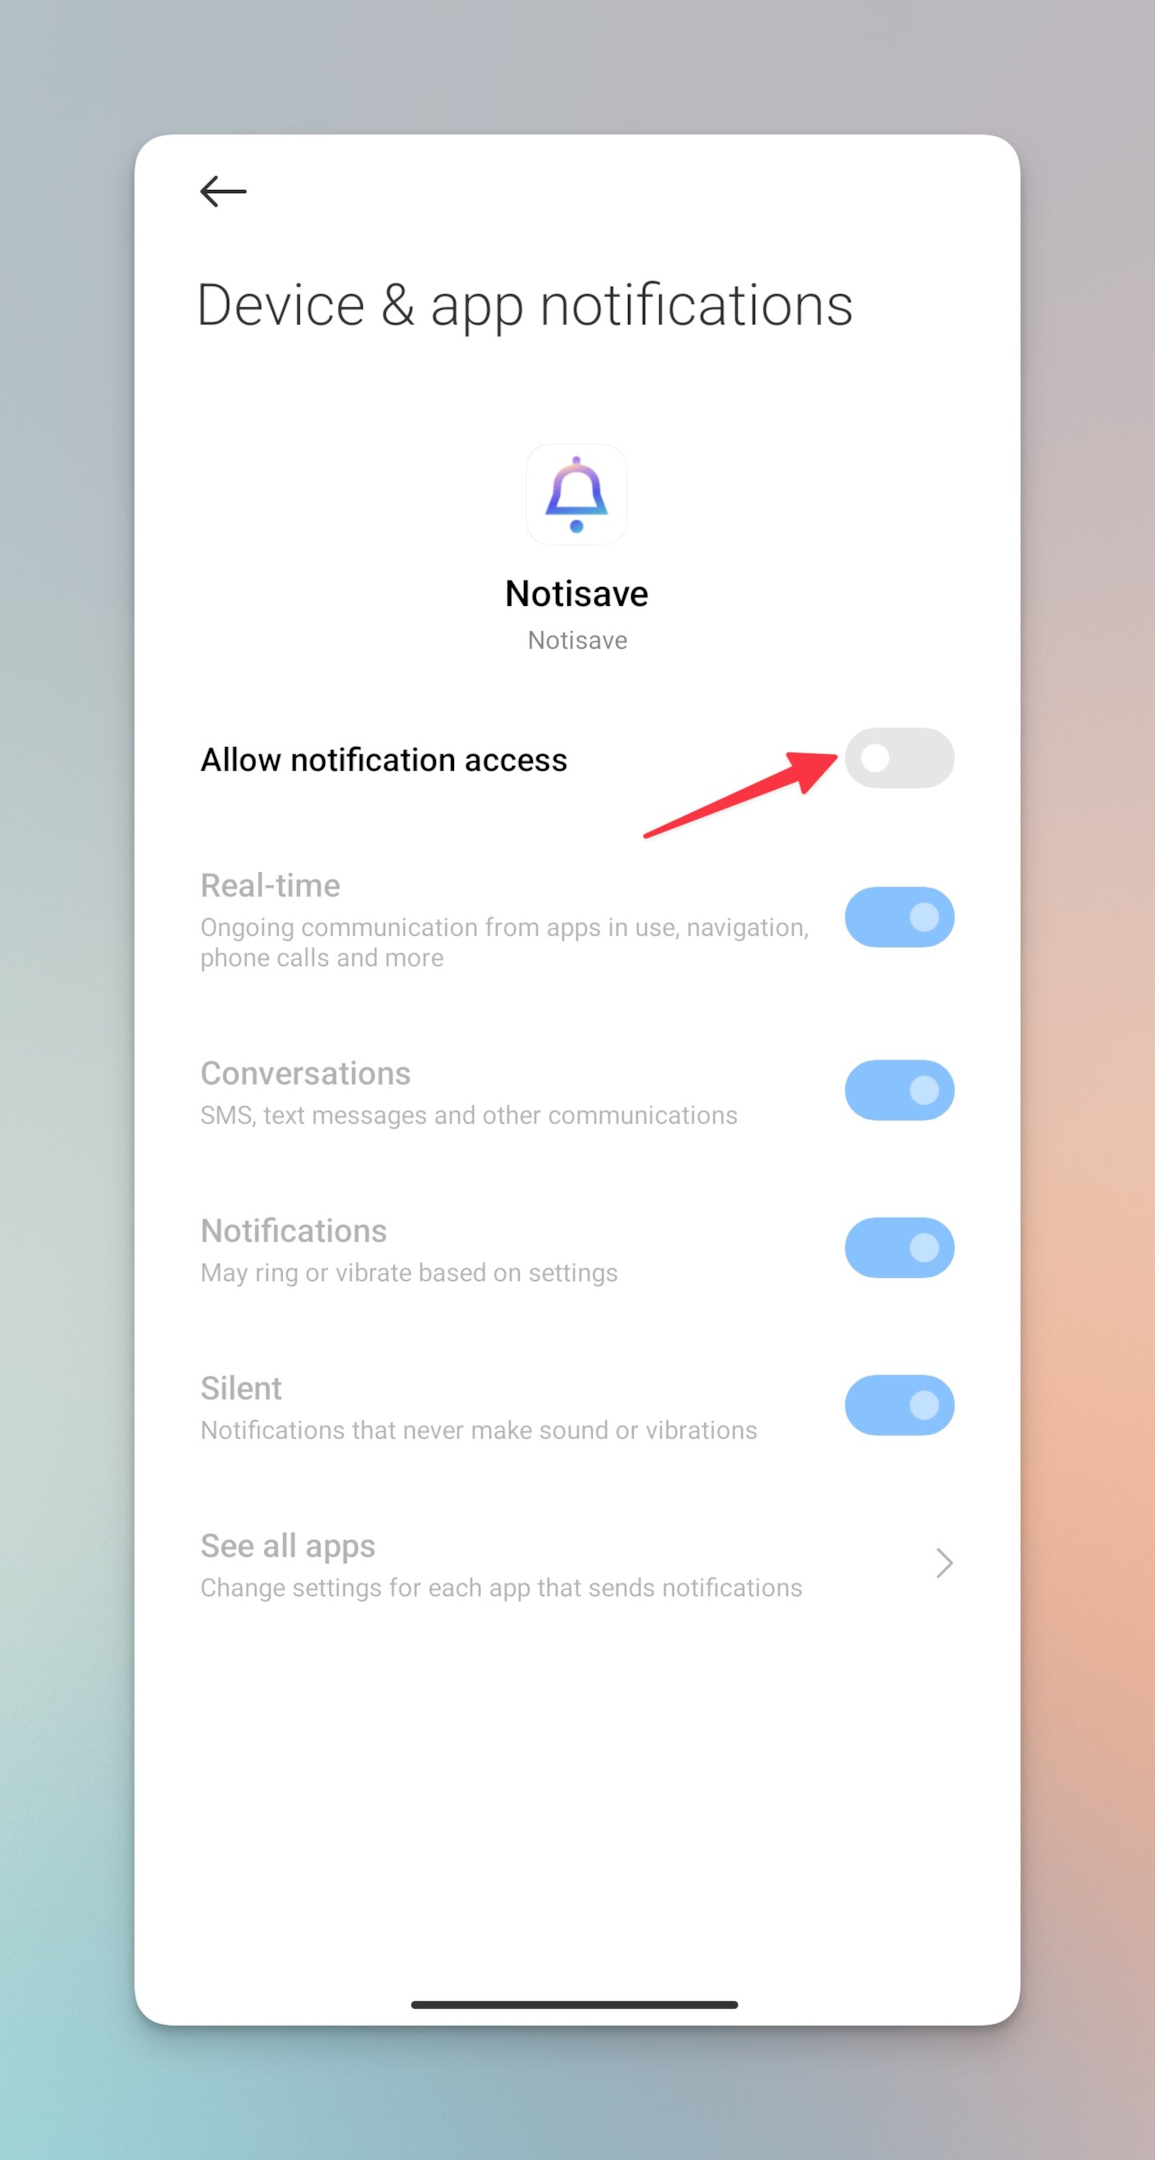 Remote.tools shows Notisave app for android device to allow notification access 